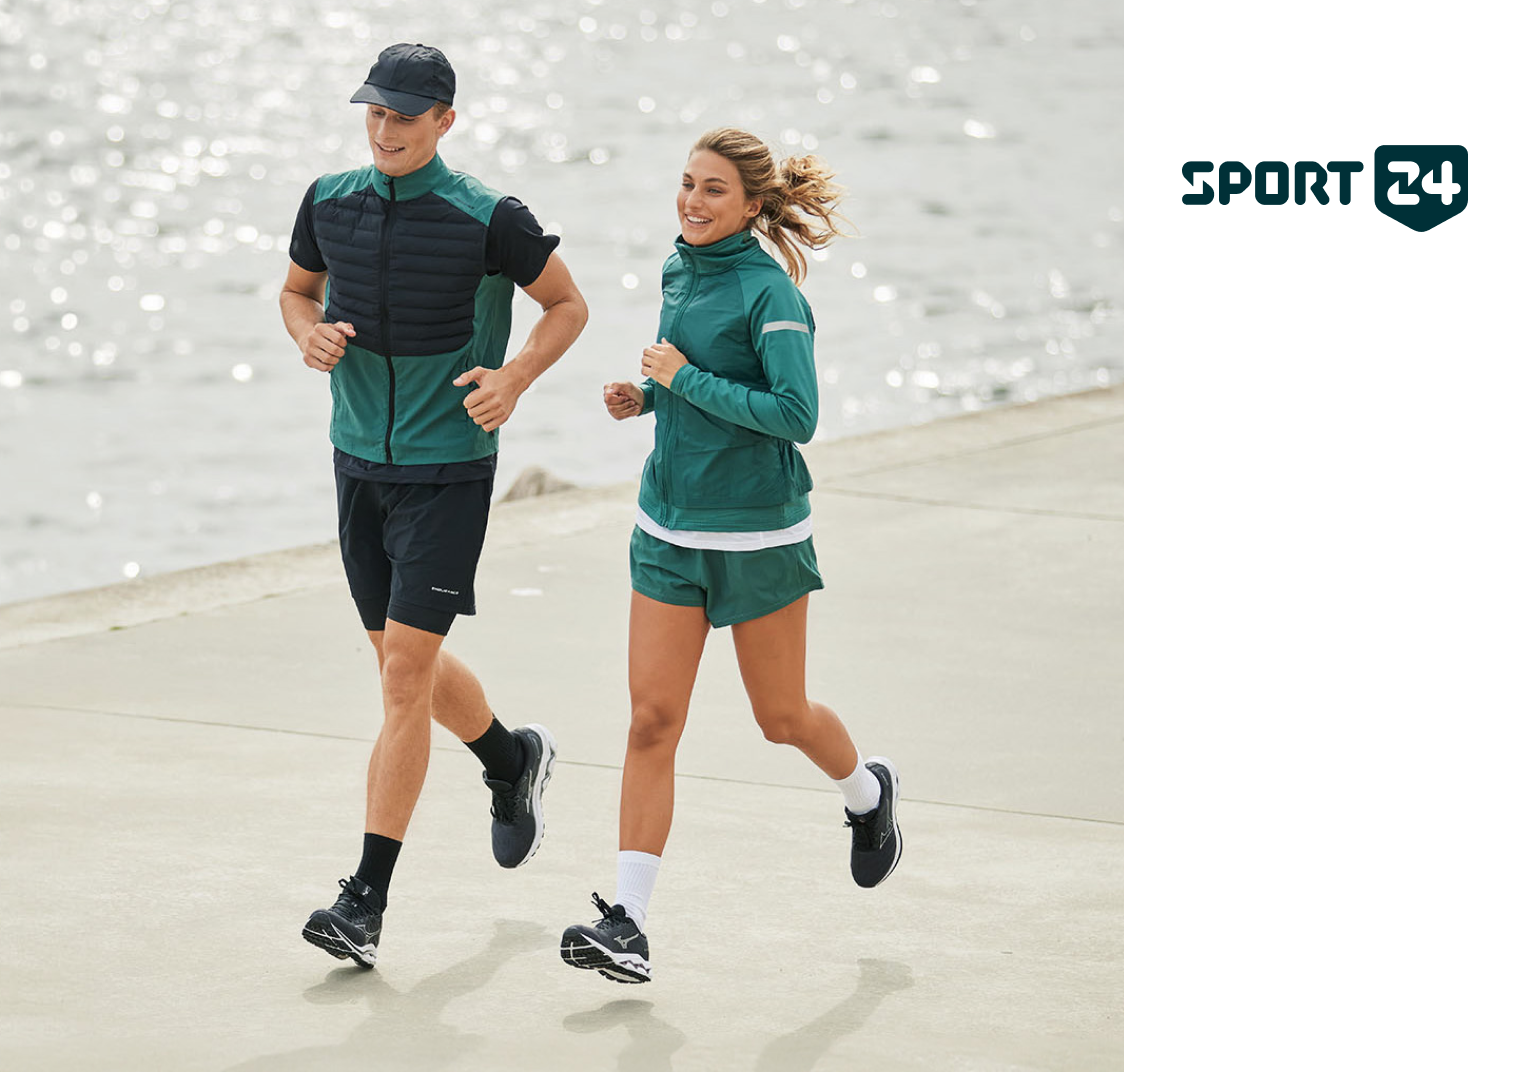 SPORT 24 is a prominent sports retail chain offering a diverse collection of sports apparel and equipment for the whole family headquartered in Denmark.